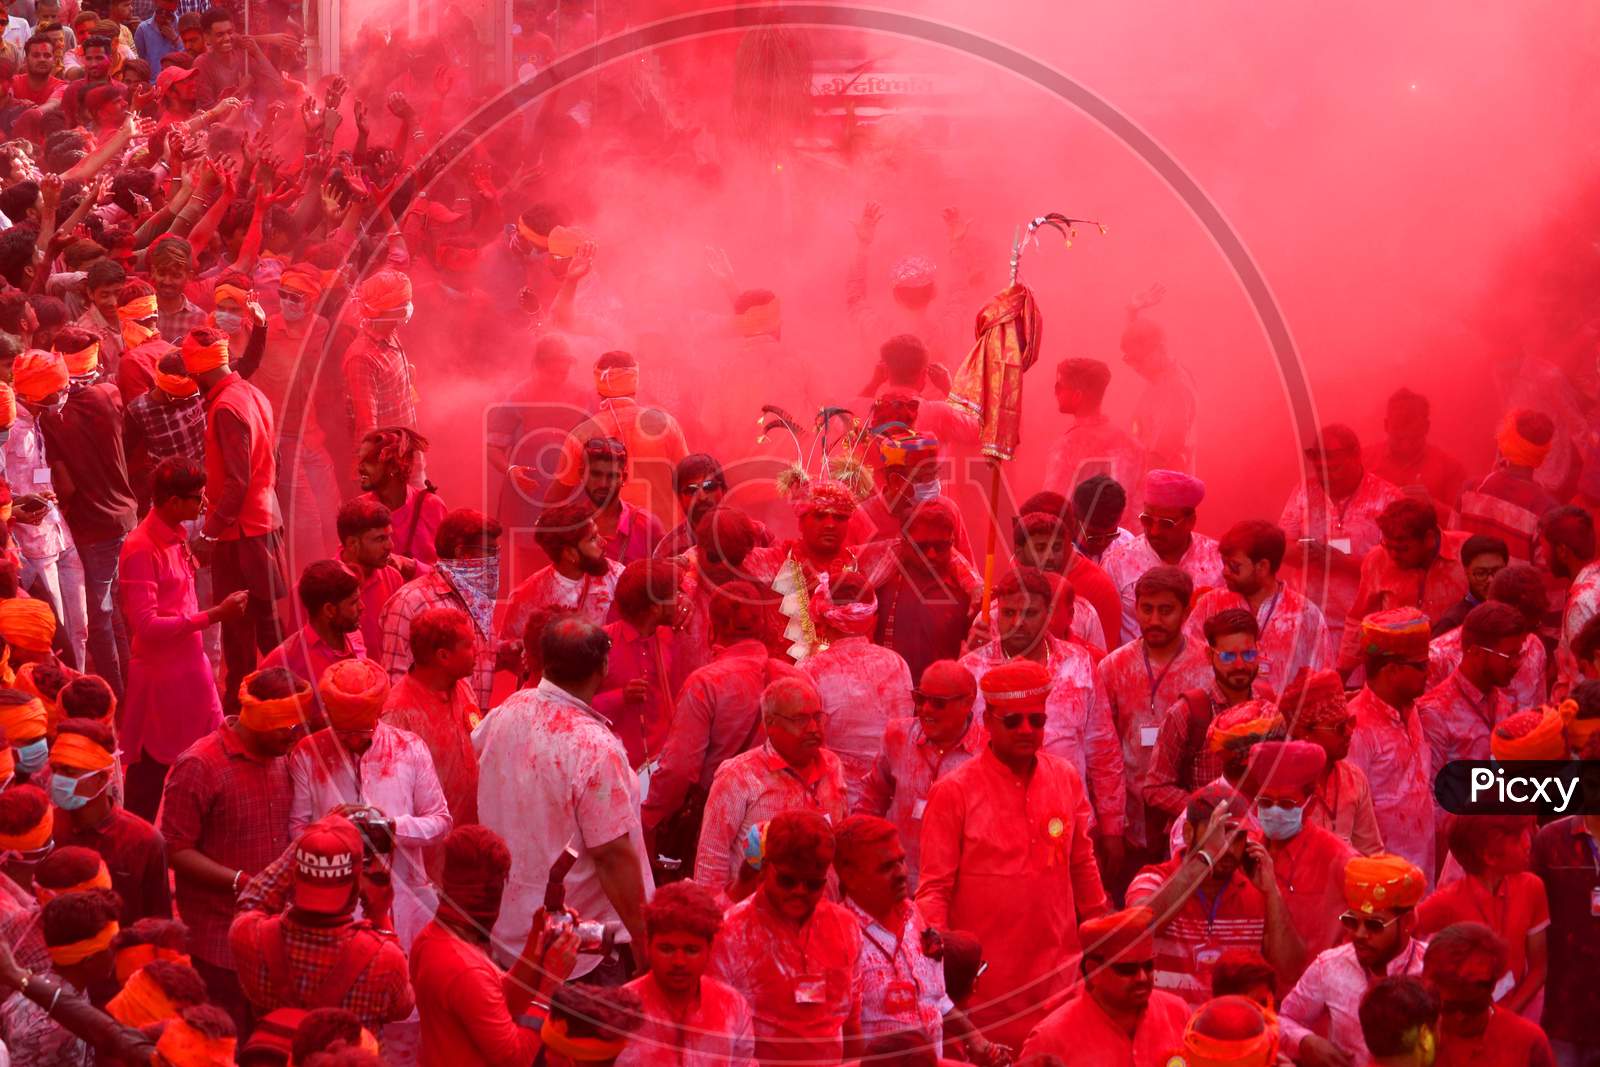 Men daubed in colour dance as they take part in a colourful procession locally known as "Badshah ki Sawari" as part of Holi, the Festival of Colours, celebrations in Beawar, in the desert state of Rajasthan, India, 11 March 2020